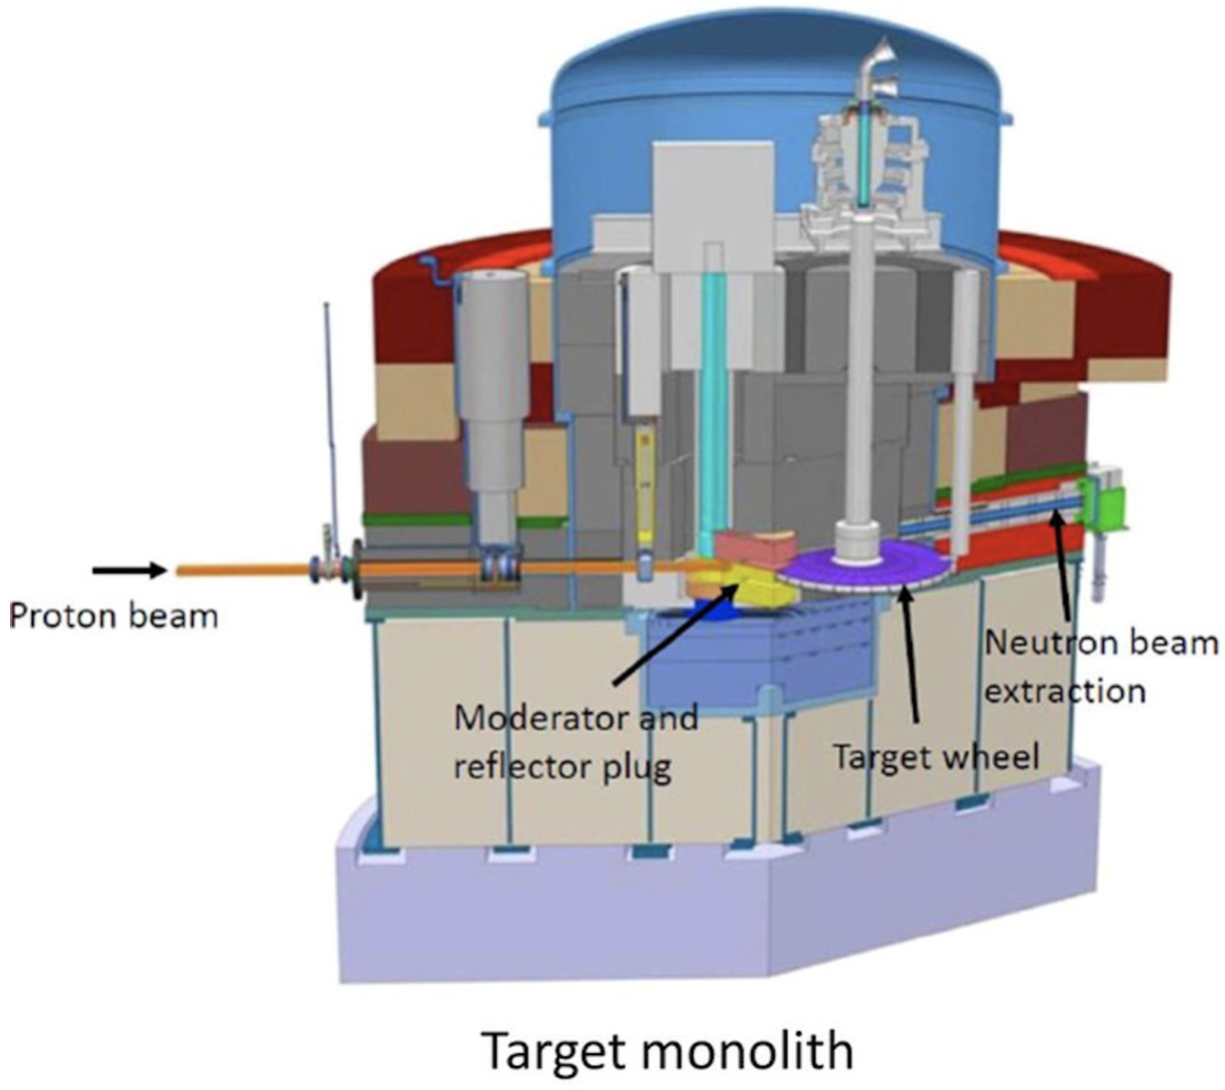 The ESS target monolith with key components indicated: moderator and reflector plug, spallation target, and one of the 42 neutron beam ports.